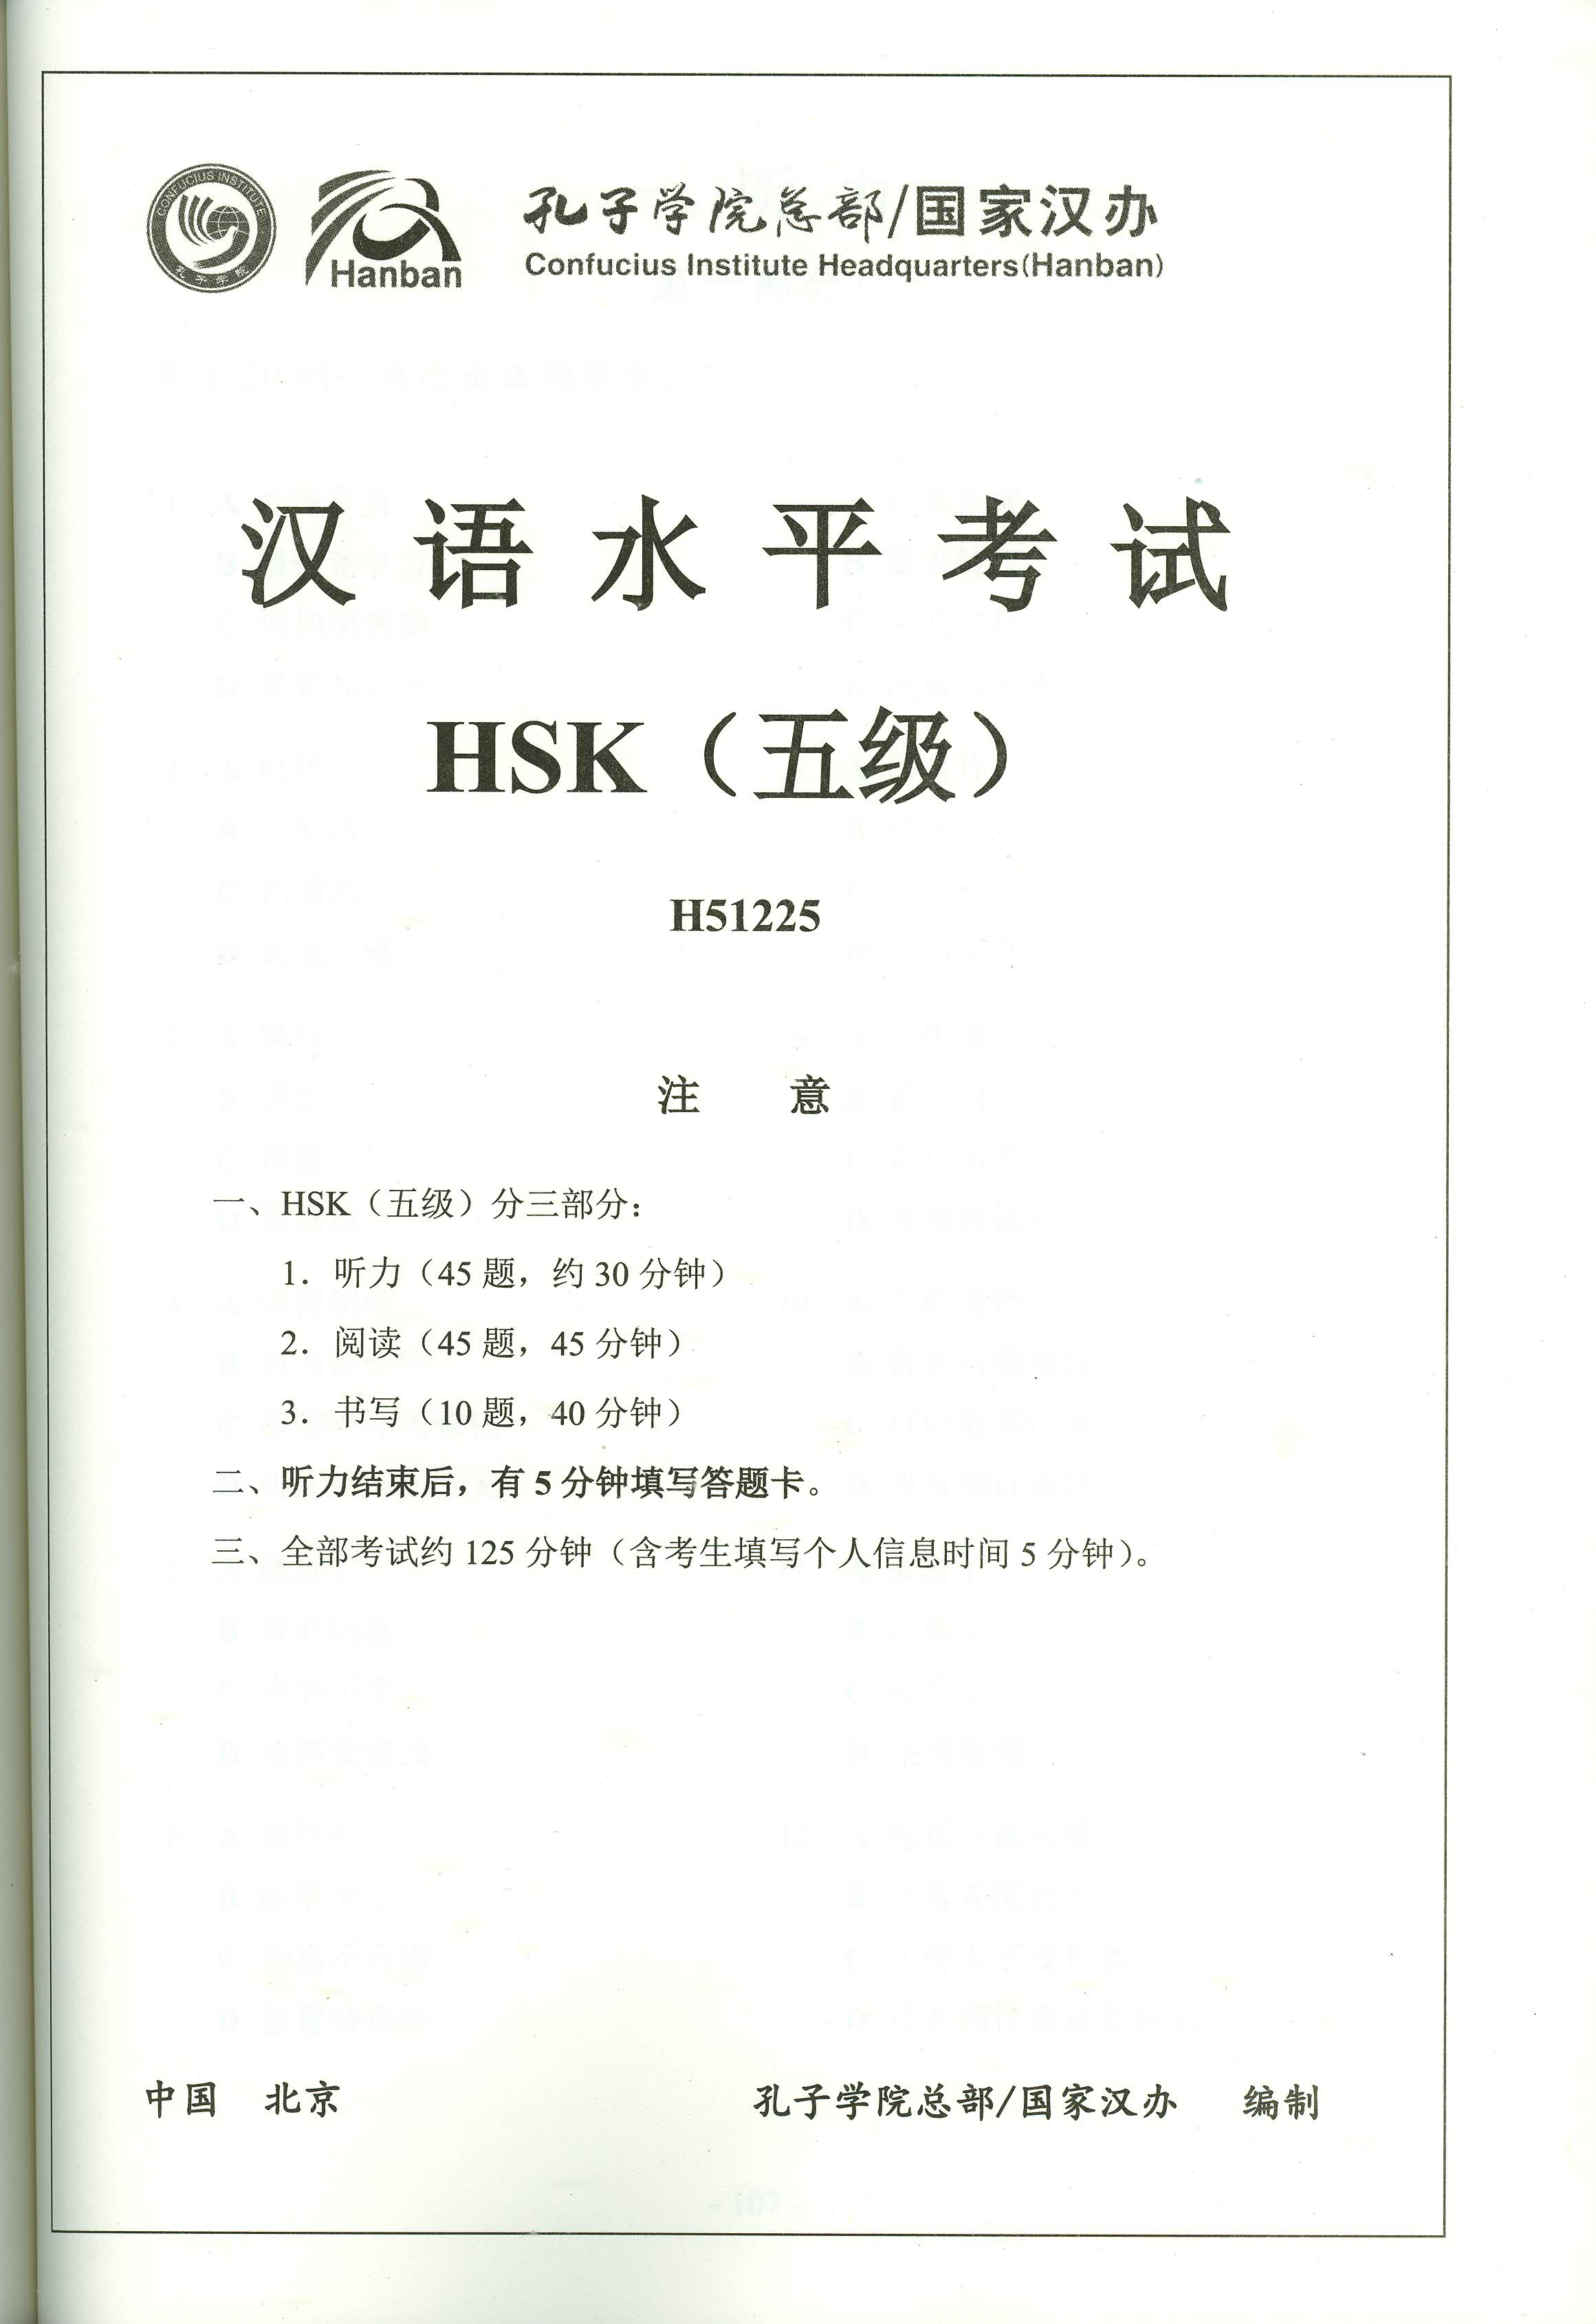 hsk5 h51225 official exam paper template